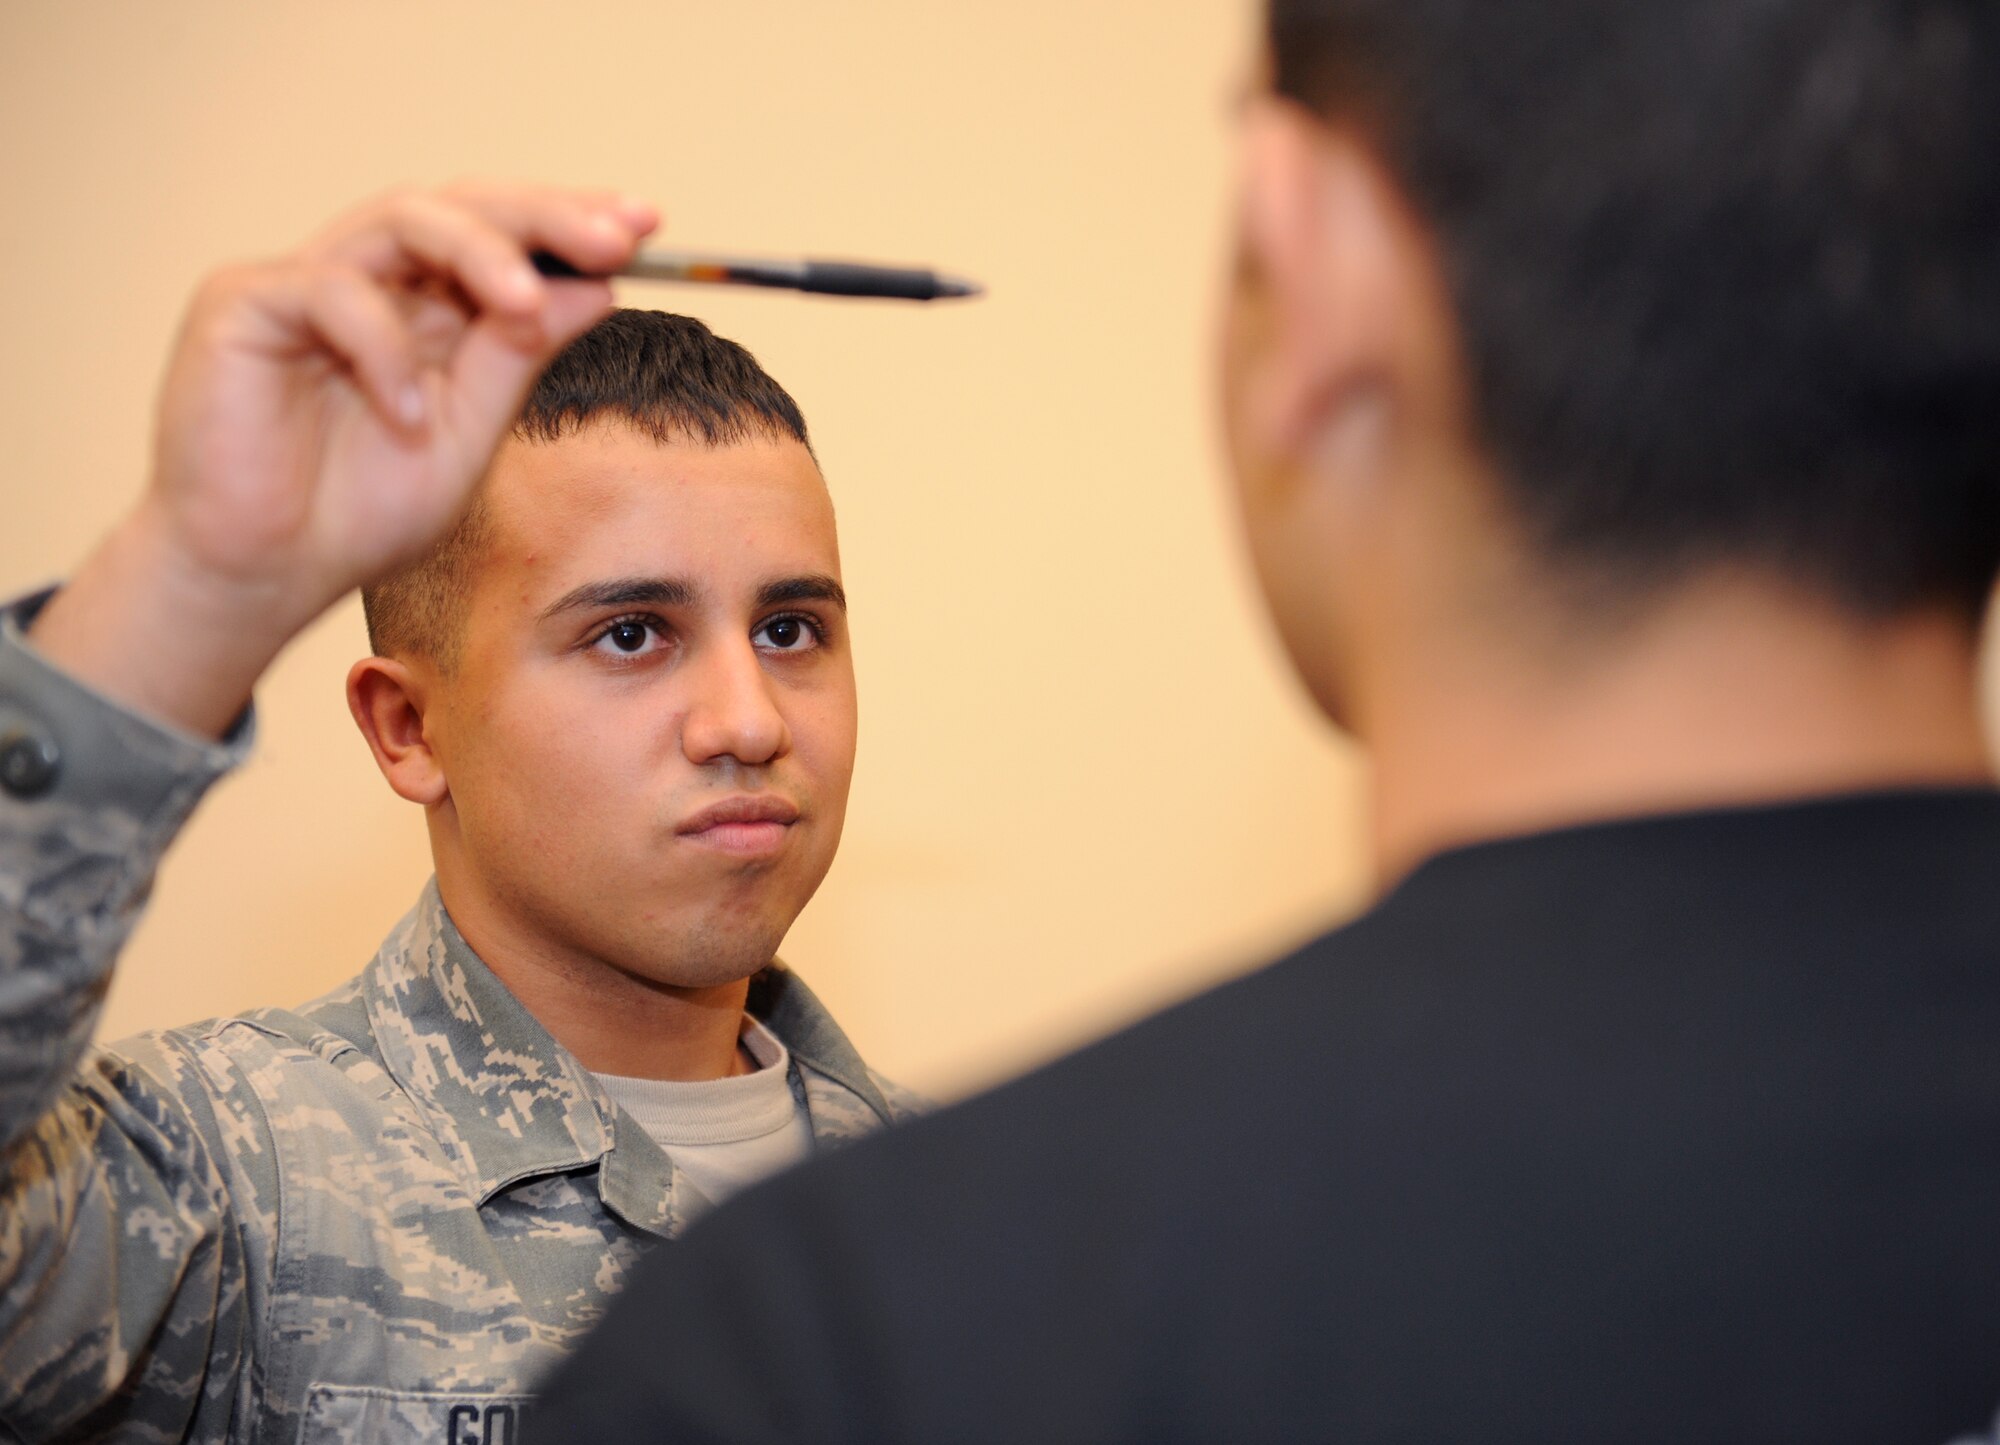 Airman 1st Class Caleb Gomez, 2nd Security Forces Squadron patrolman, performs a horizontal line test during standardized field sobriety test training on Barksdale Air Force Base, La., July 24, 2013. The horizontal line test, also known as the horizontal gaze nystagmus, is used on possible impaired drivers to check the jerking movements of their eyes as an object is moved across their line of sight. (U.S. Air Force photo/Airman 1st Class Benjamin Gonsier)
